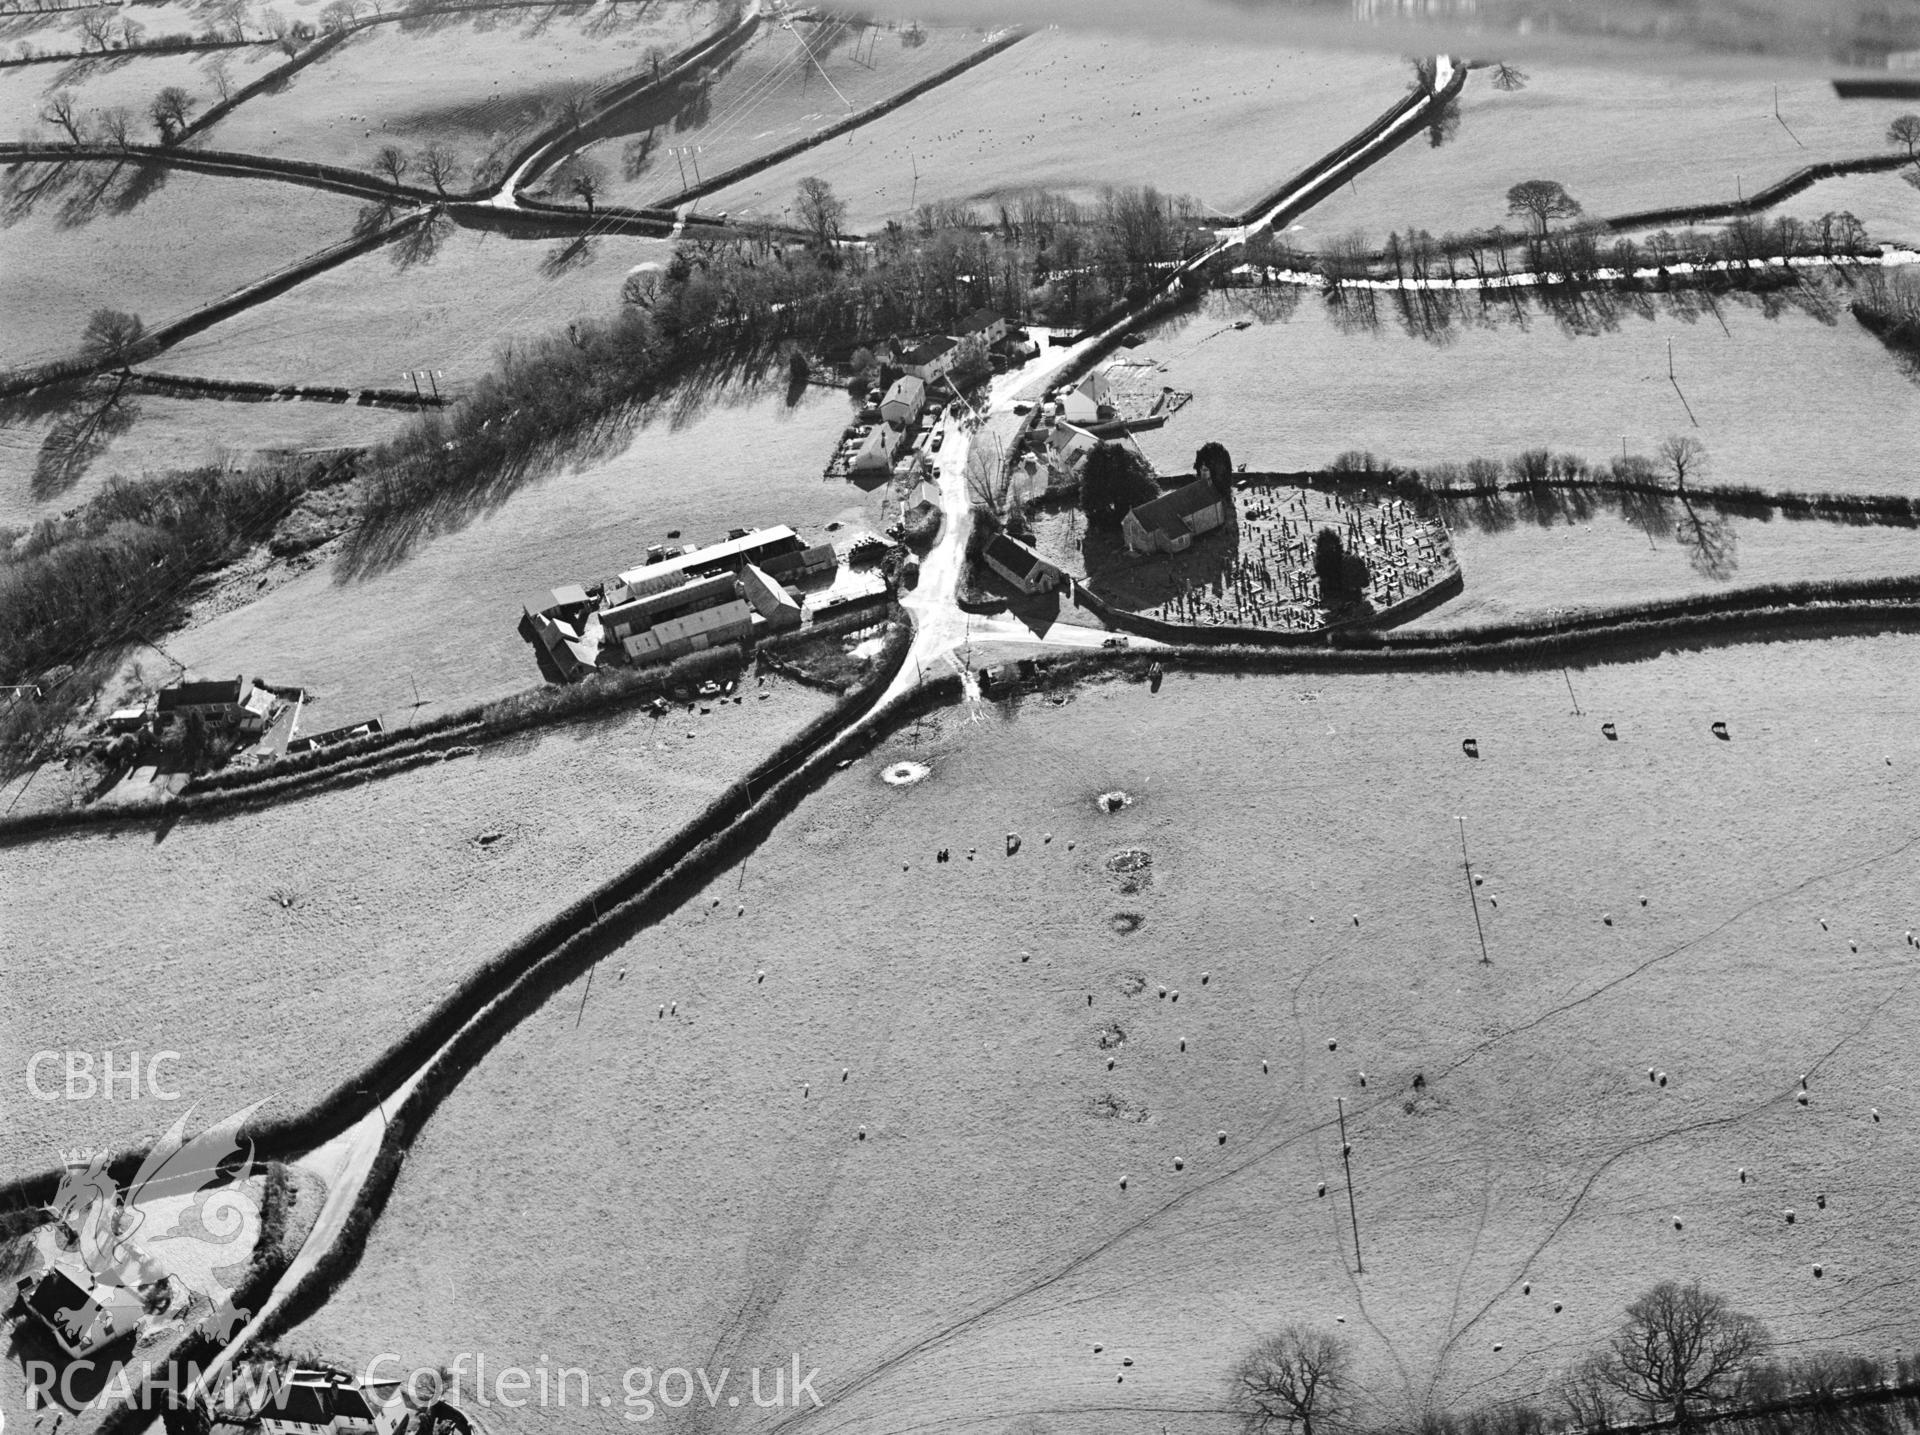 RCAHMW black and white oblique aerial photograph of St. Mary's Church, Llanfair Clydogau, with outer earthwork enclosure. Taken by Toby Driver on 15/11/2002